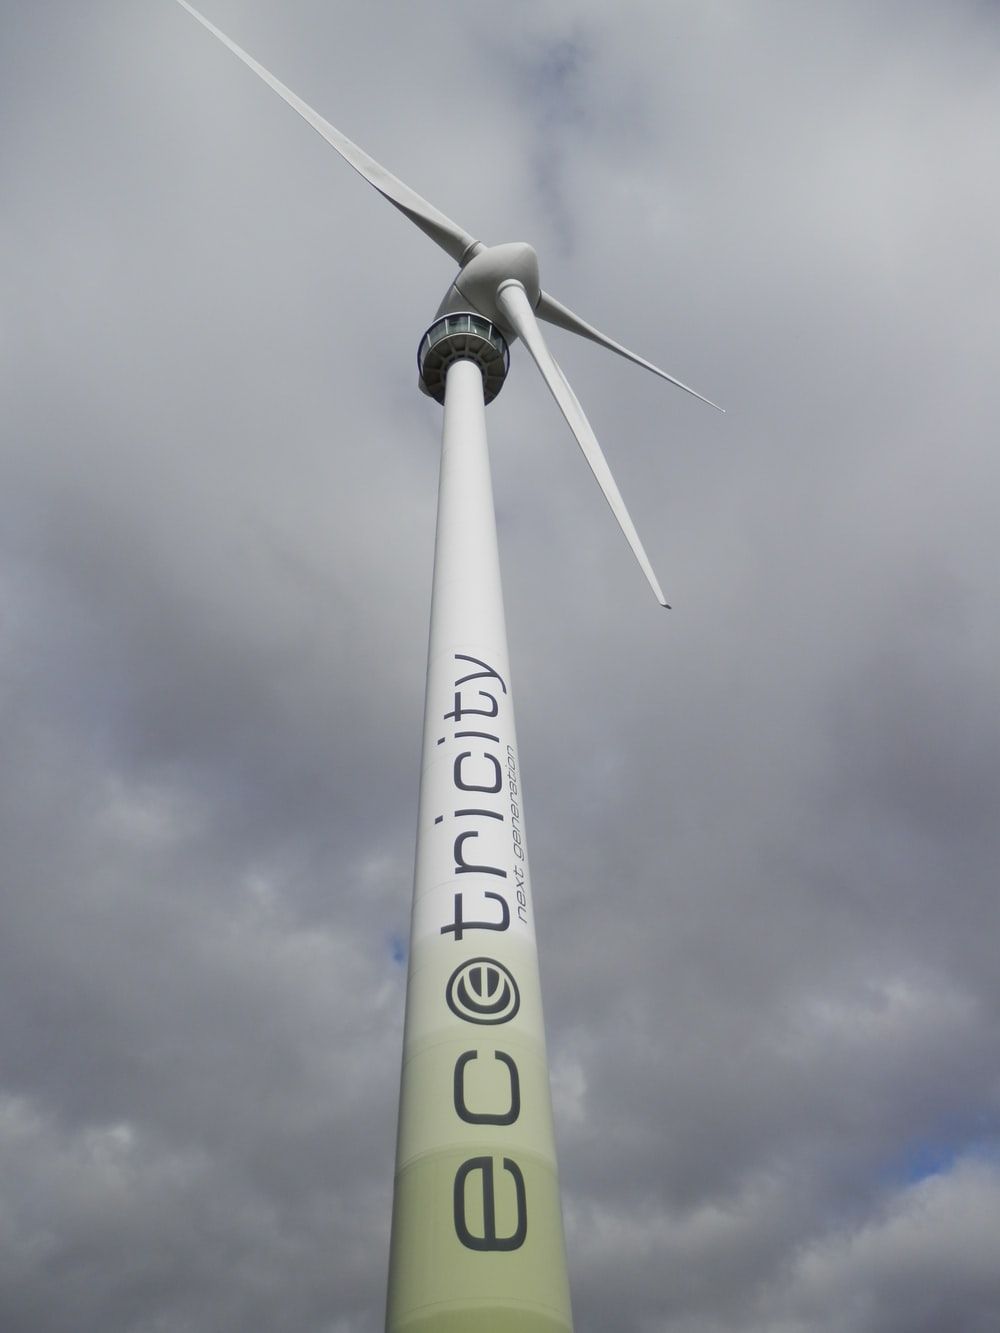 Renewable Energy Picture. Download Free Image